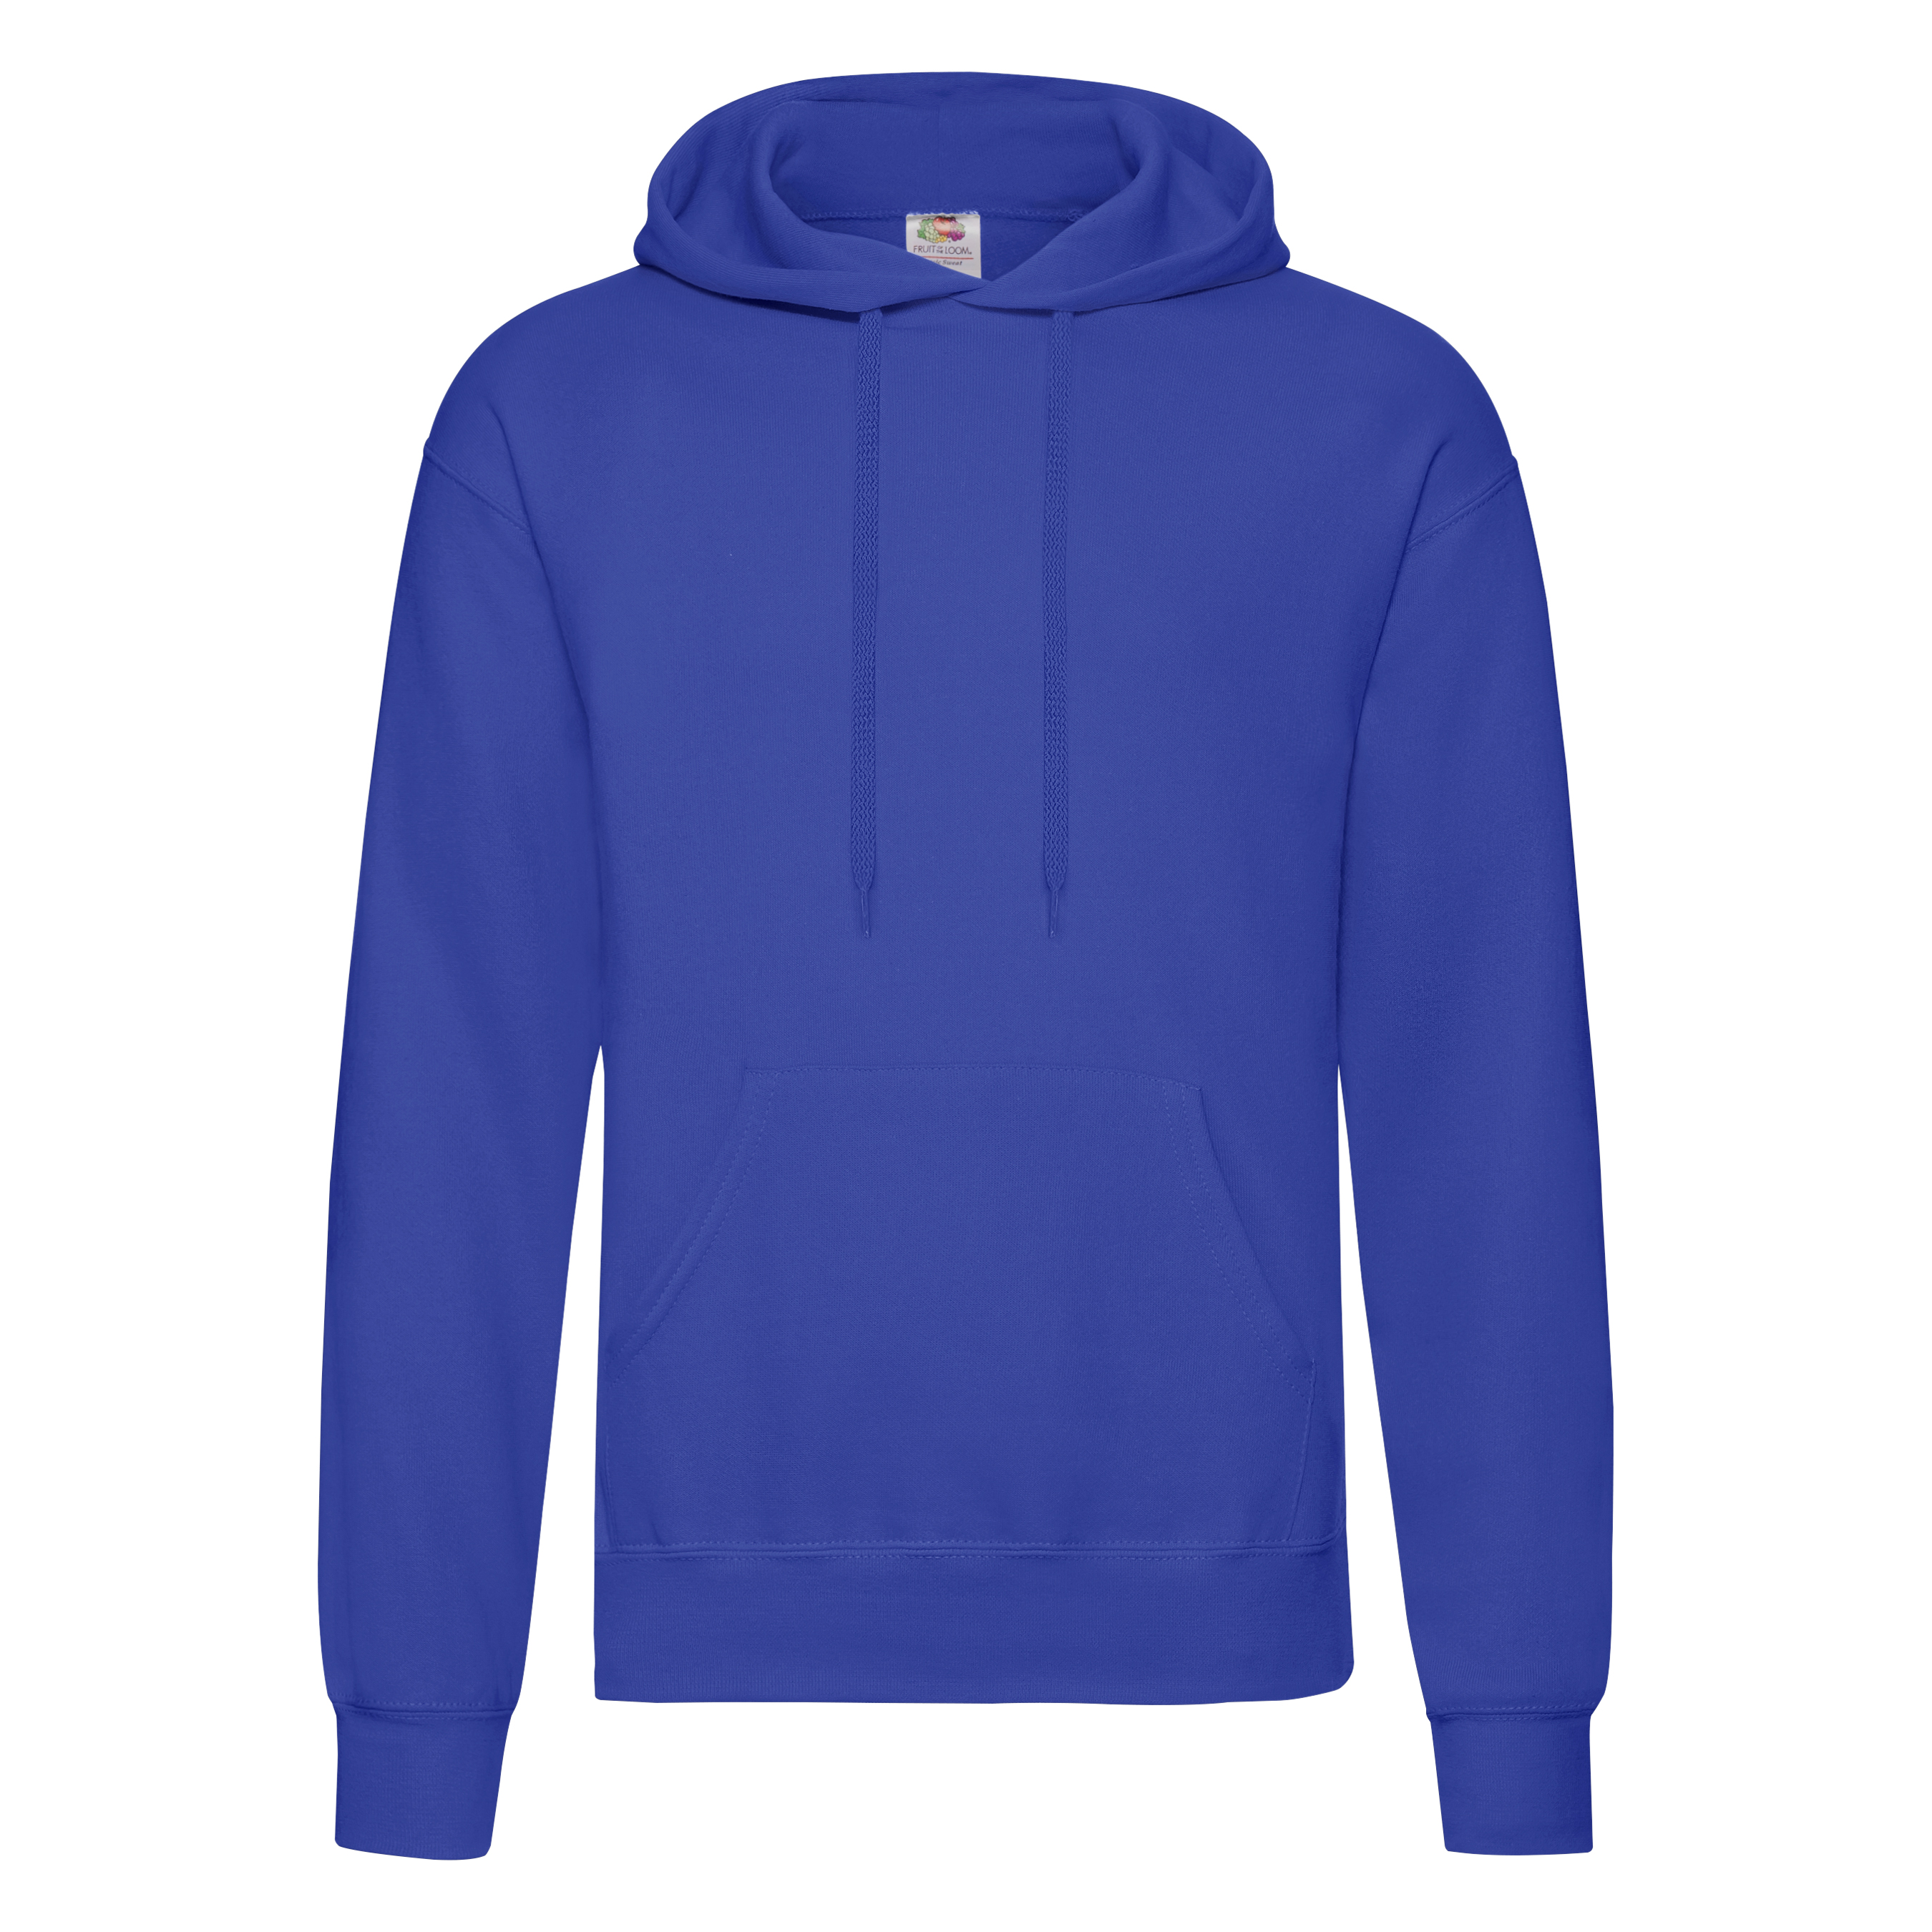 ax-httpswebsystems.s3.amazonaws.comtmp_for_downloadfruit-of-the-loom-classic-80-20-hooded-sweatshirt-royal-blue.jpeg